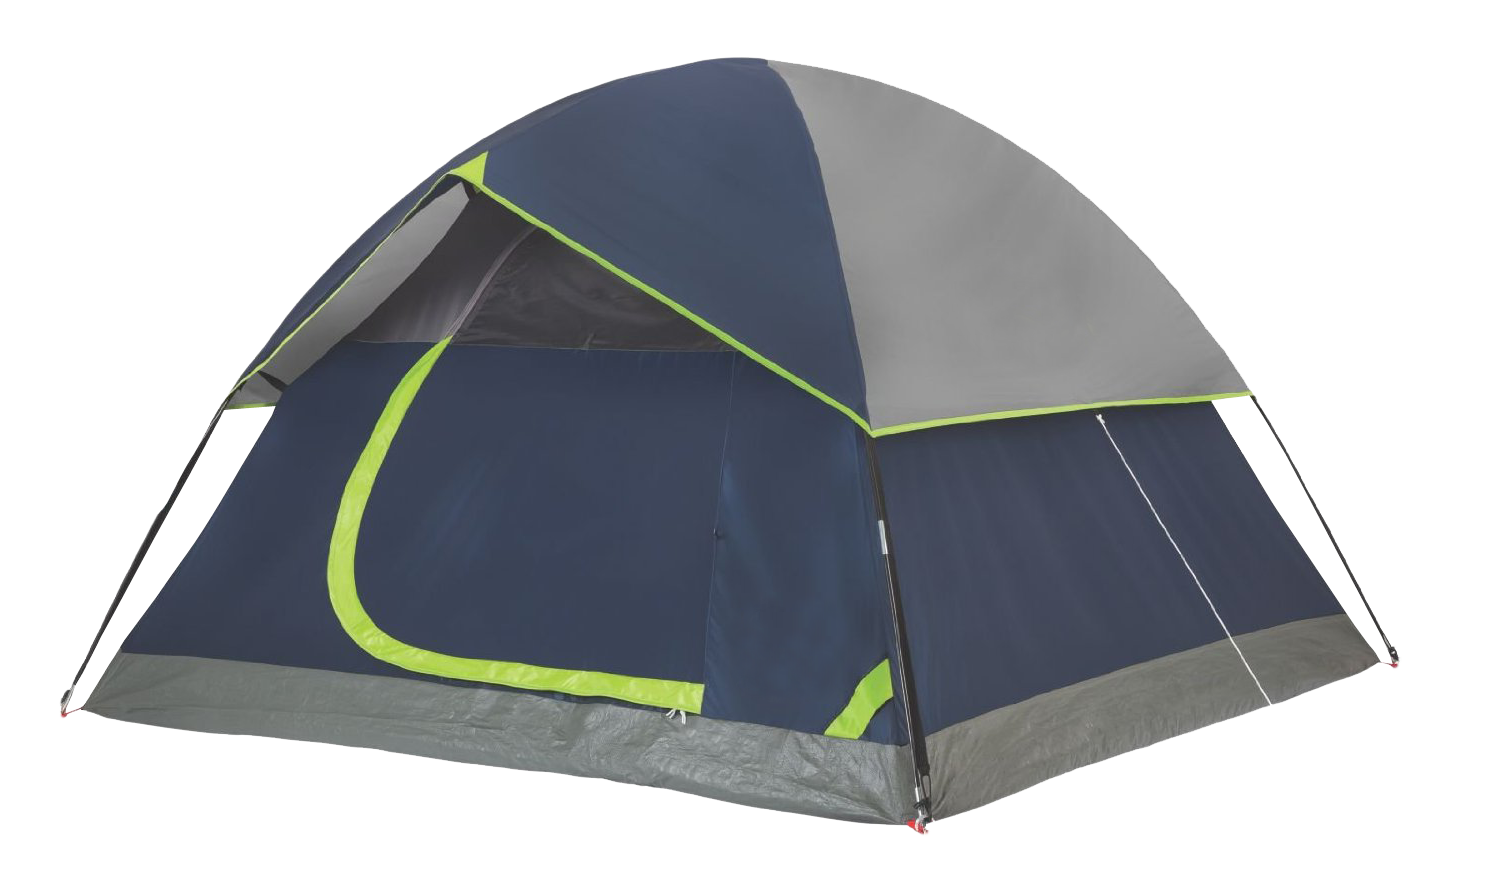 Camp Dome Tent Free Download Image PNG Image